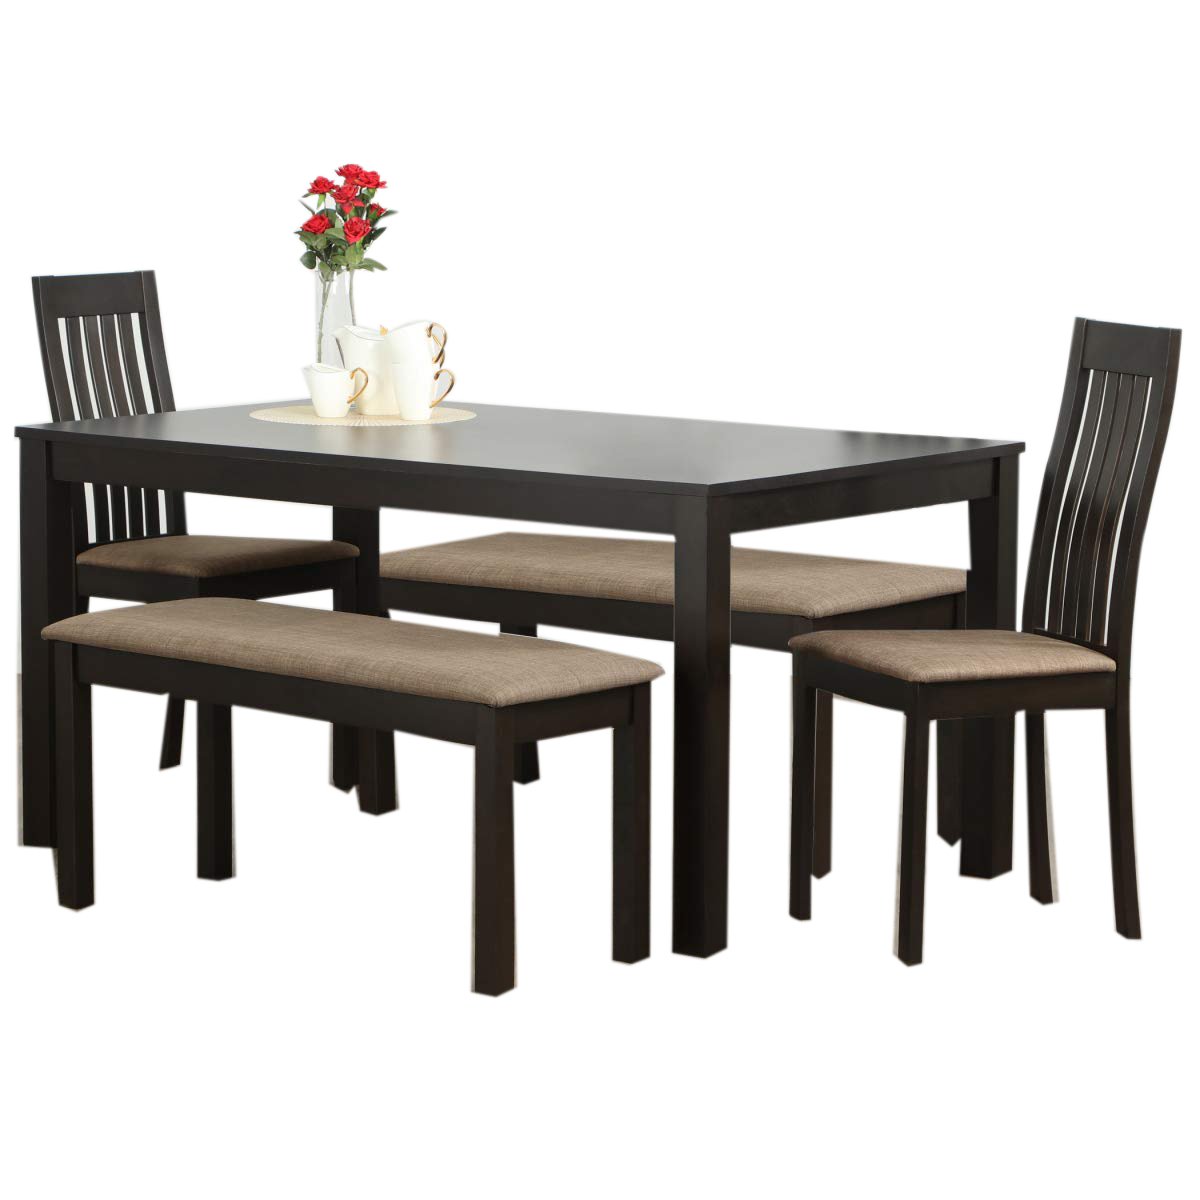 Marshall 6 Seater Dining Table with 2 Chairs and 2 Bench (Beige Walnut Finish) - Torque India